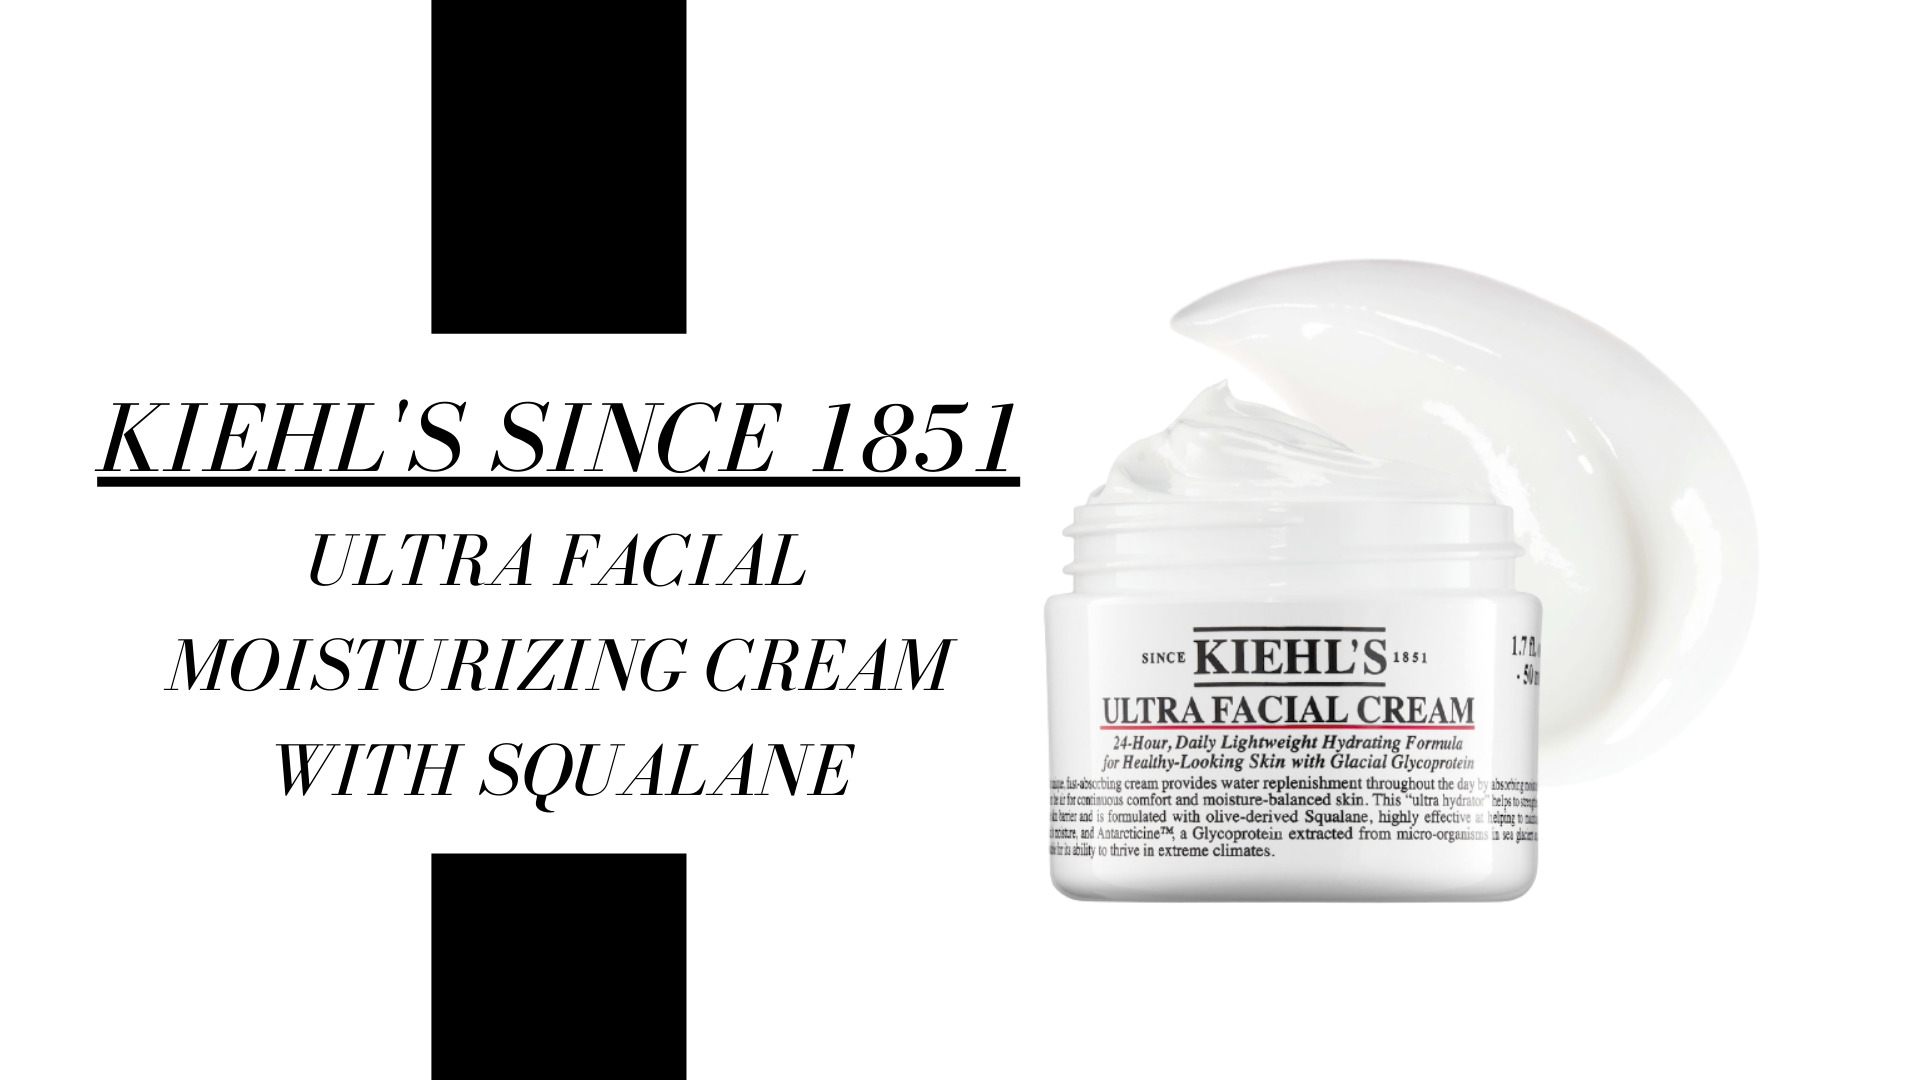 Last but not least, we present you the this Kiehl's moisturizer! We love this line that Kiehl's has - The cleanser is also really nice. This product is a fragrance-free moisturizing cream formulated with squalane that provides up to 24 hours of ultra-lightweight hydration.